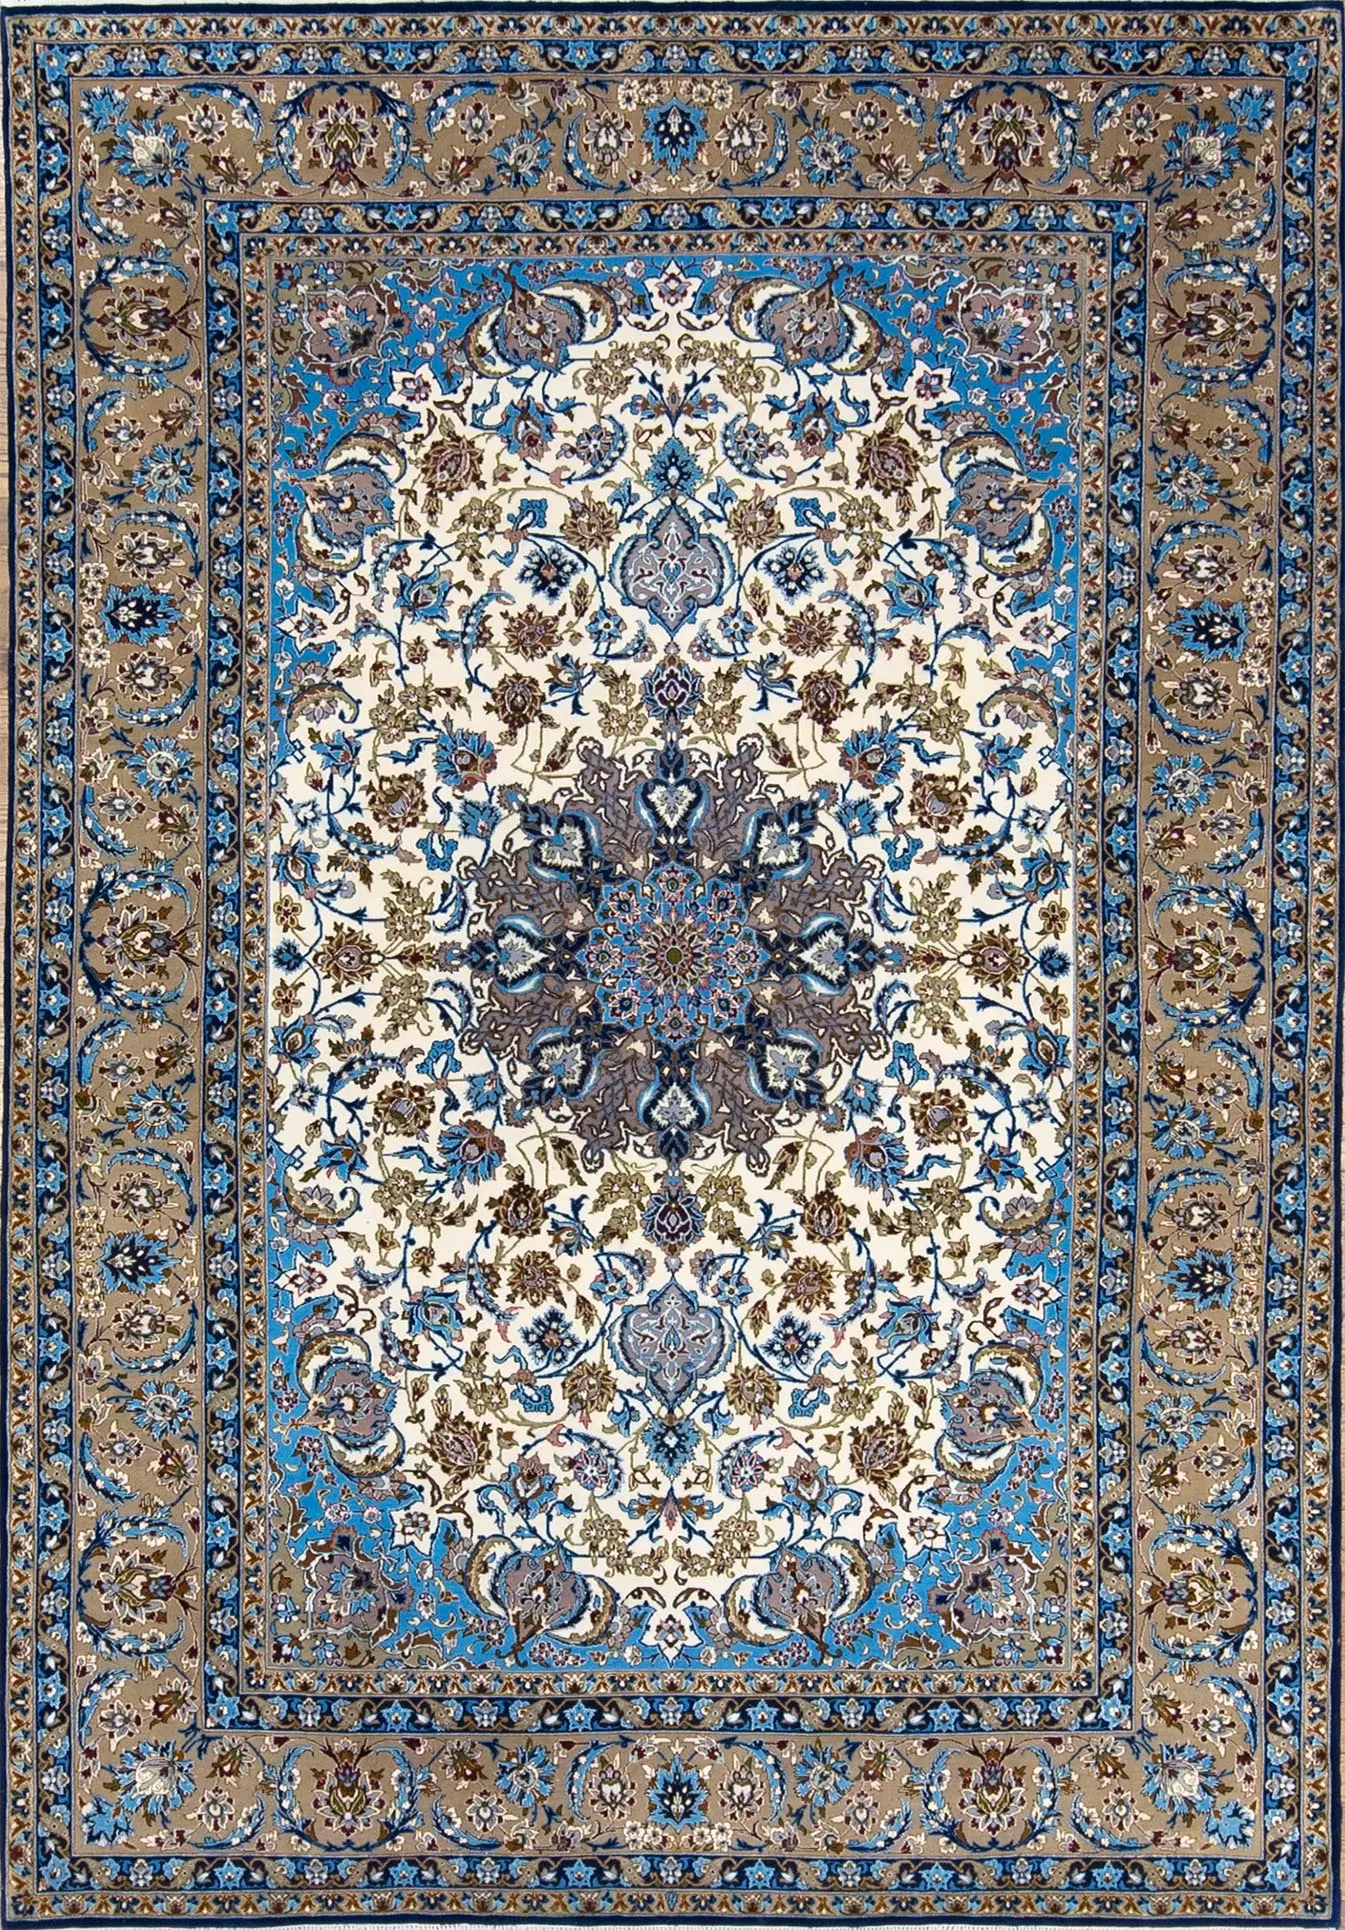 Best rugs. Beautiful Persian Isfahan rug made of the finest quality Japanese kork wool and silk with beige and blue colors. Size 5.4x7.4.